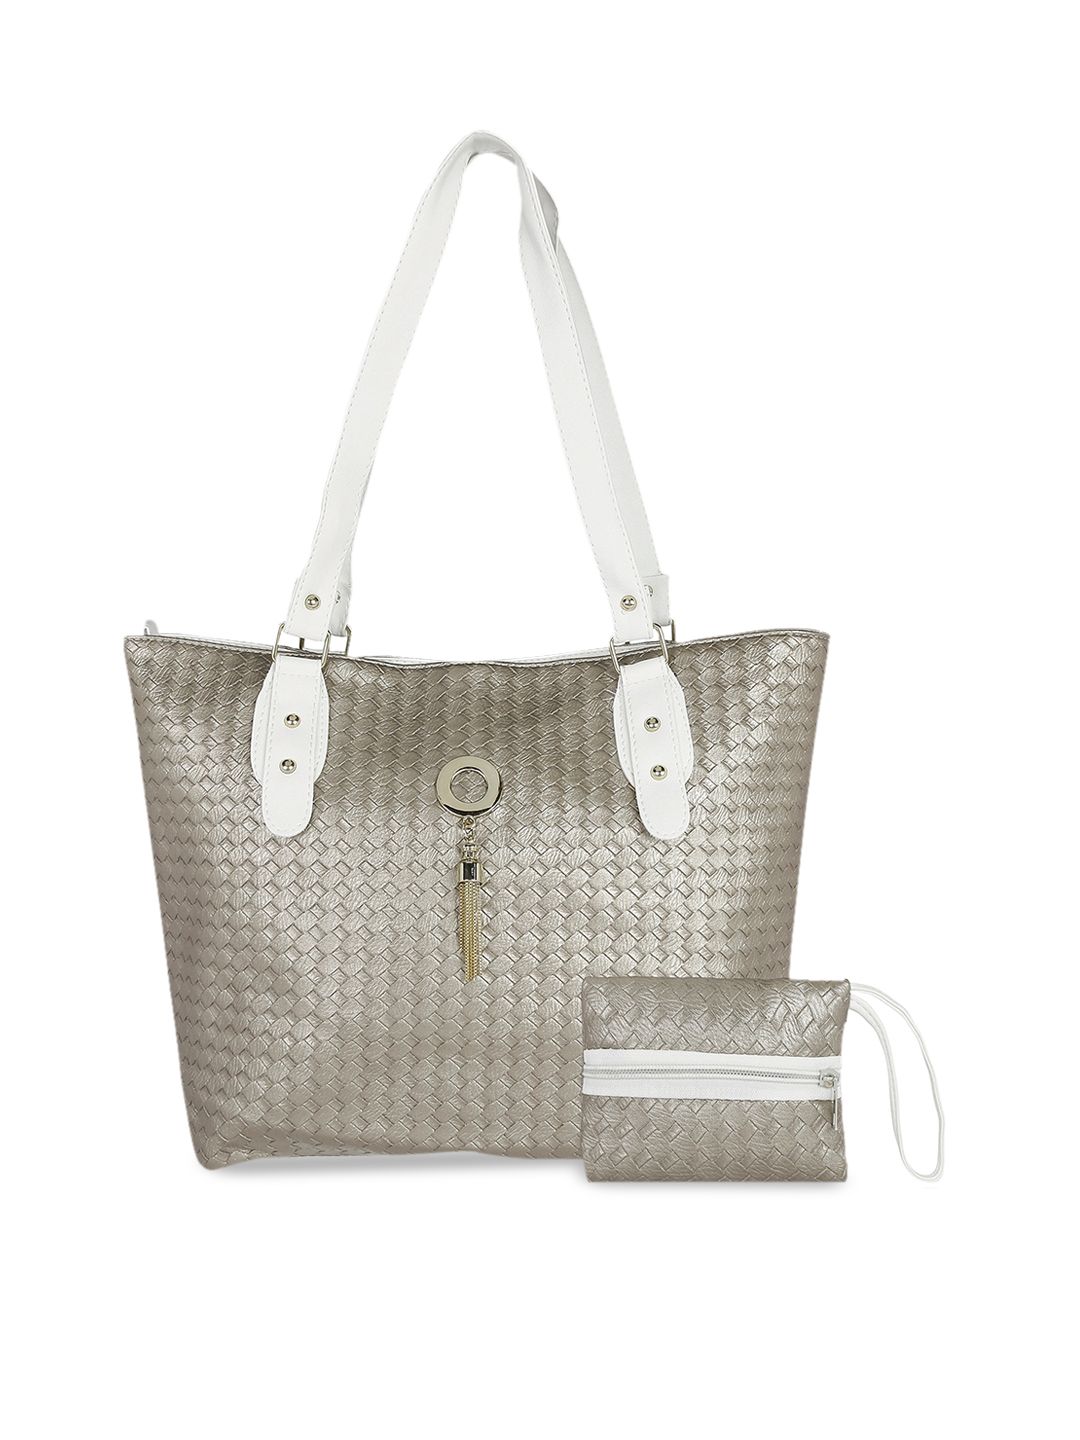 KLEIO Copper-Toned Embellished PU Structured Tote Bag Price in India